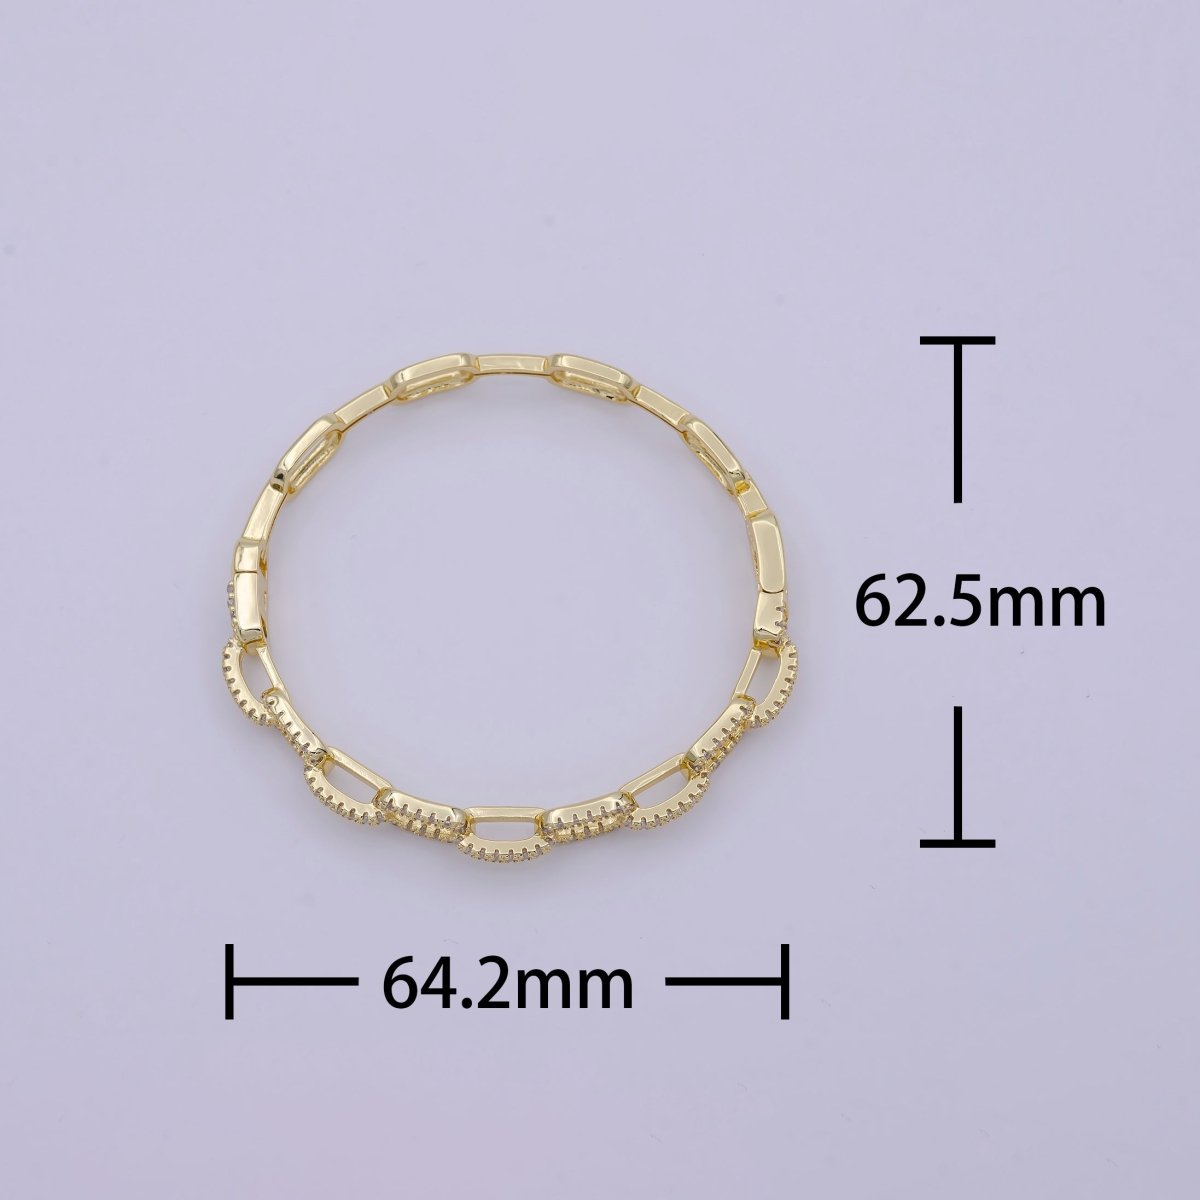 Gold PaperClip Link Chain Bracelet With Cz Stone for Stackable Bangle Jewelry | WA-688 Clearance Pricing - DLUXCA